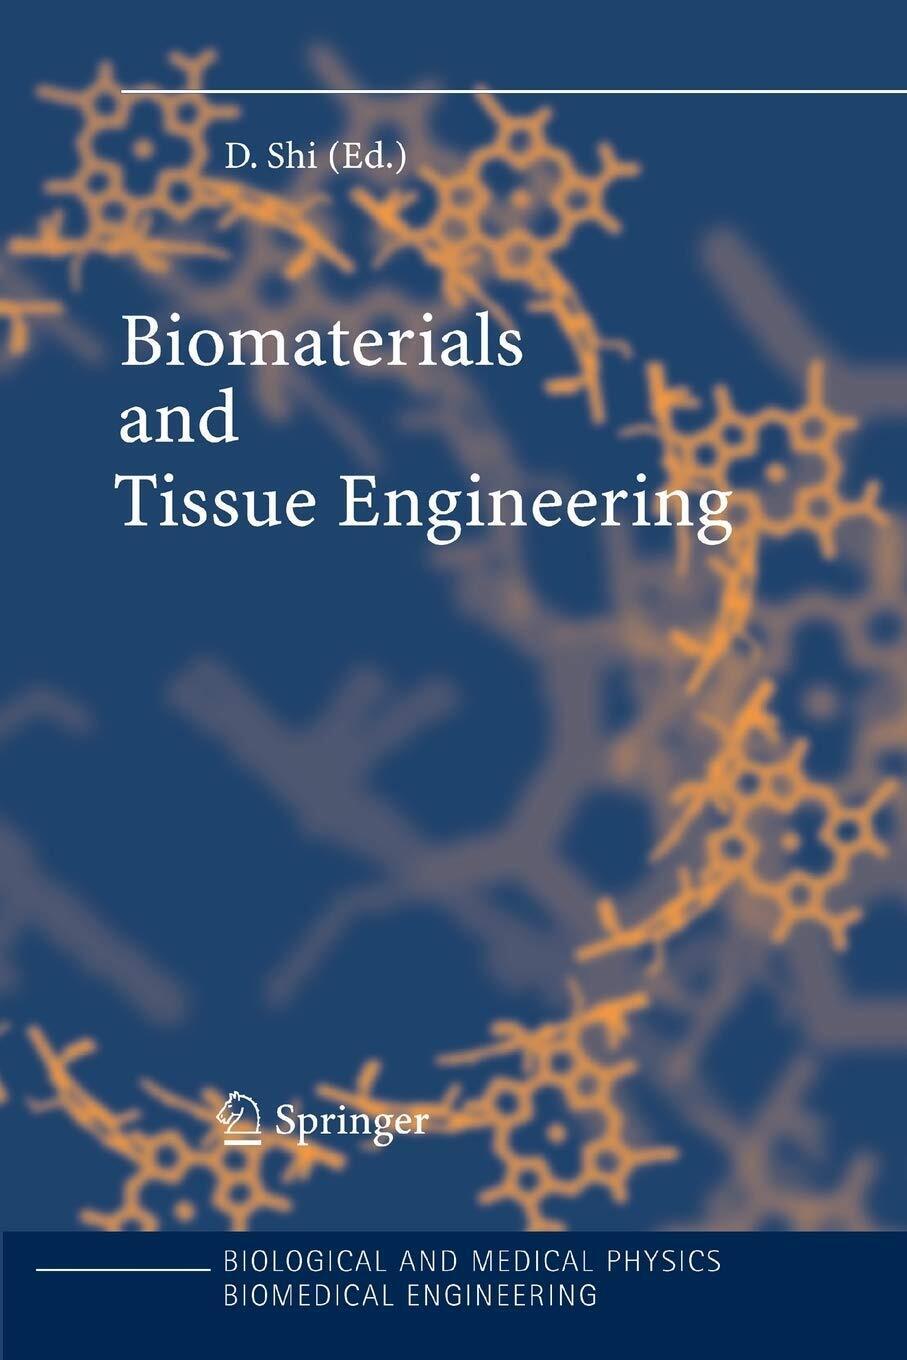 Biomaterials and Tissue Engineering - Donglu Shi - Springer, 2010